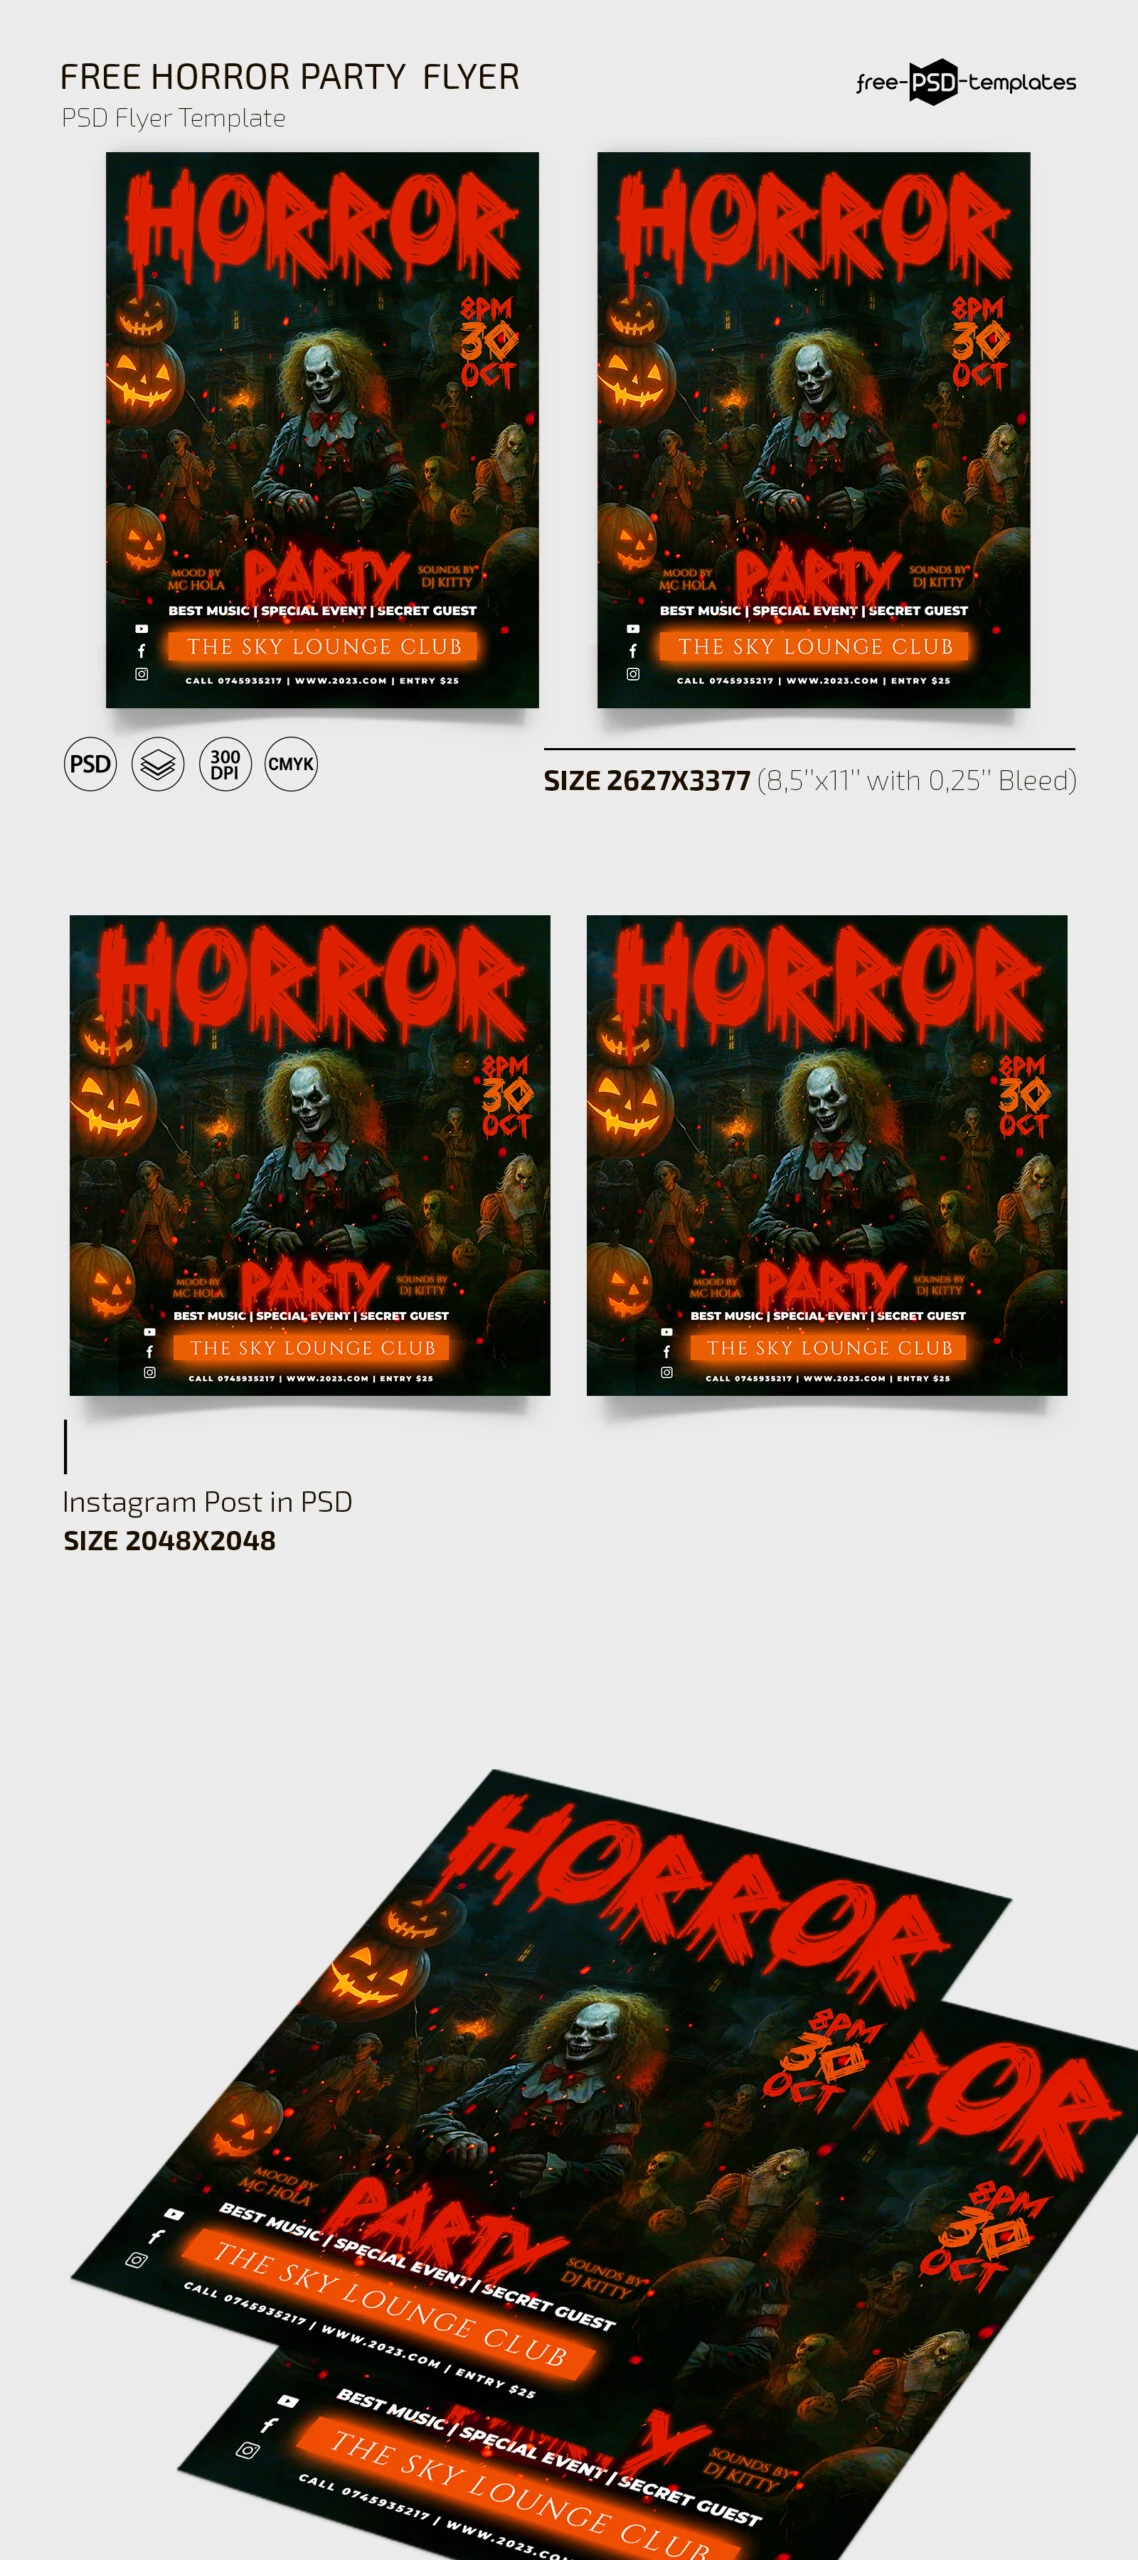 Free Horror Party Flyer Template + Instagram Post (PSD)